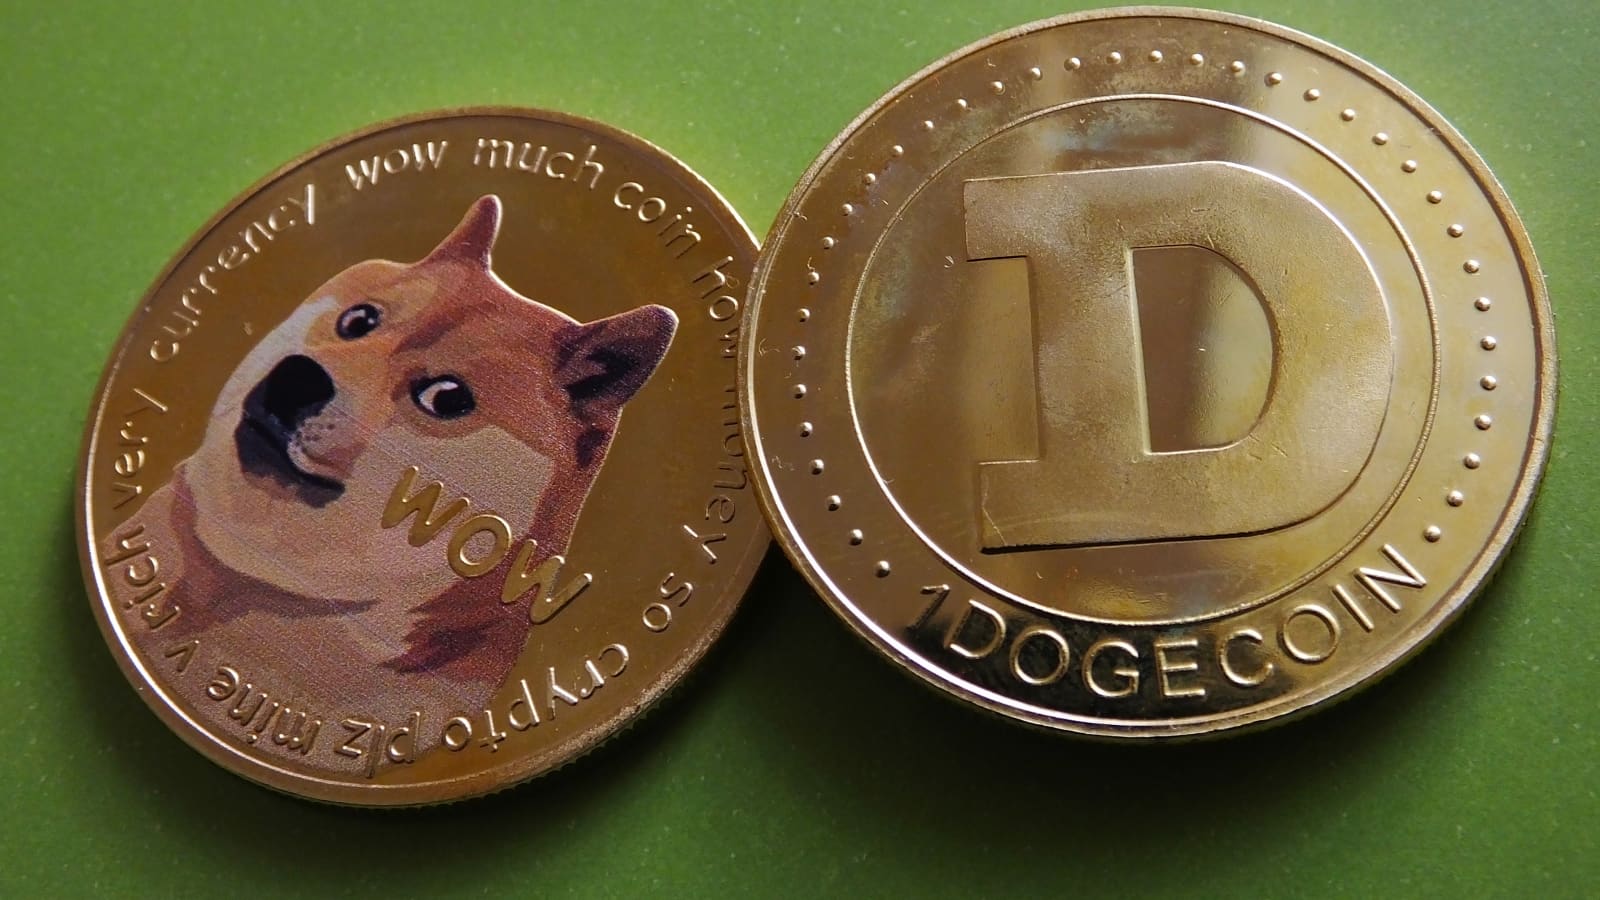 What is Dogecoin, and where does it come from